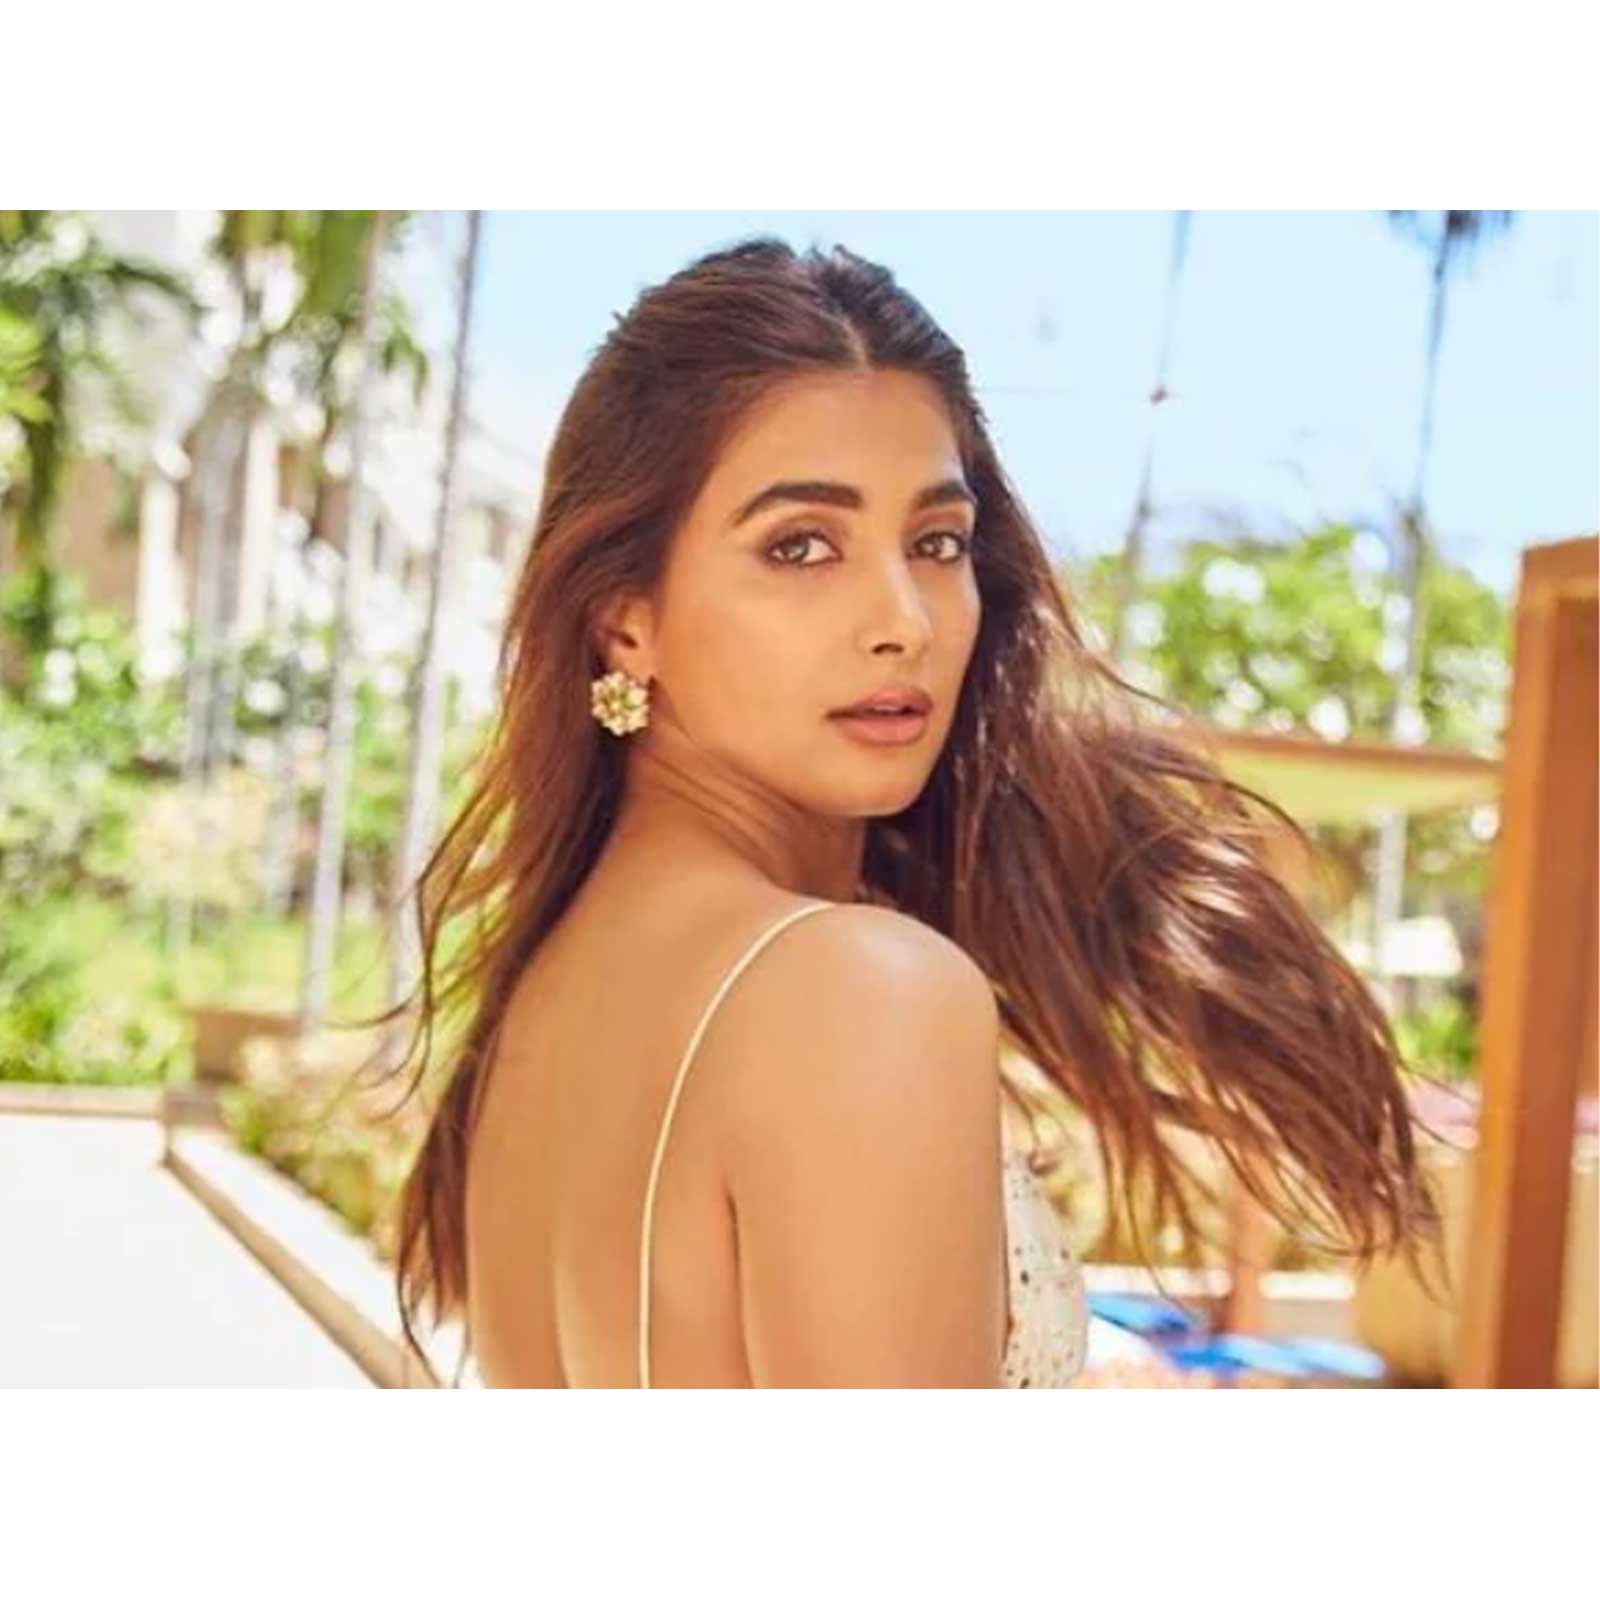 Pooja Sexy Sexy Sexy Sex - Pooja Hegde Flaunts her Beauty in Saree in Latest Photo Shoot - News18